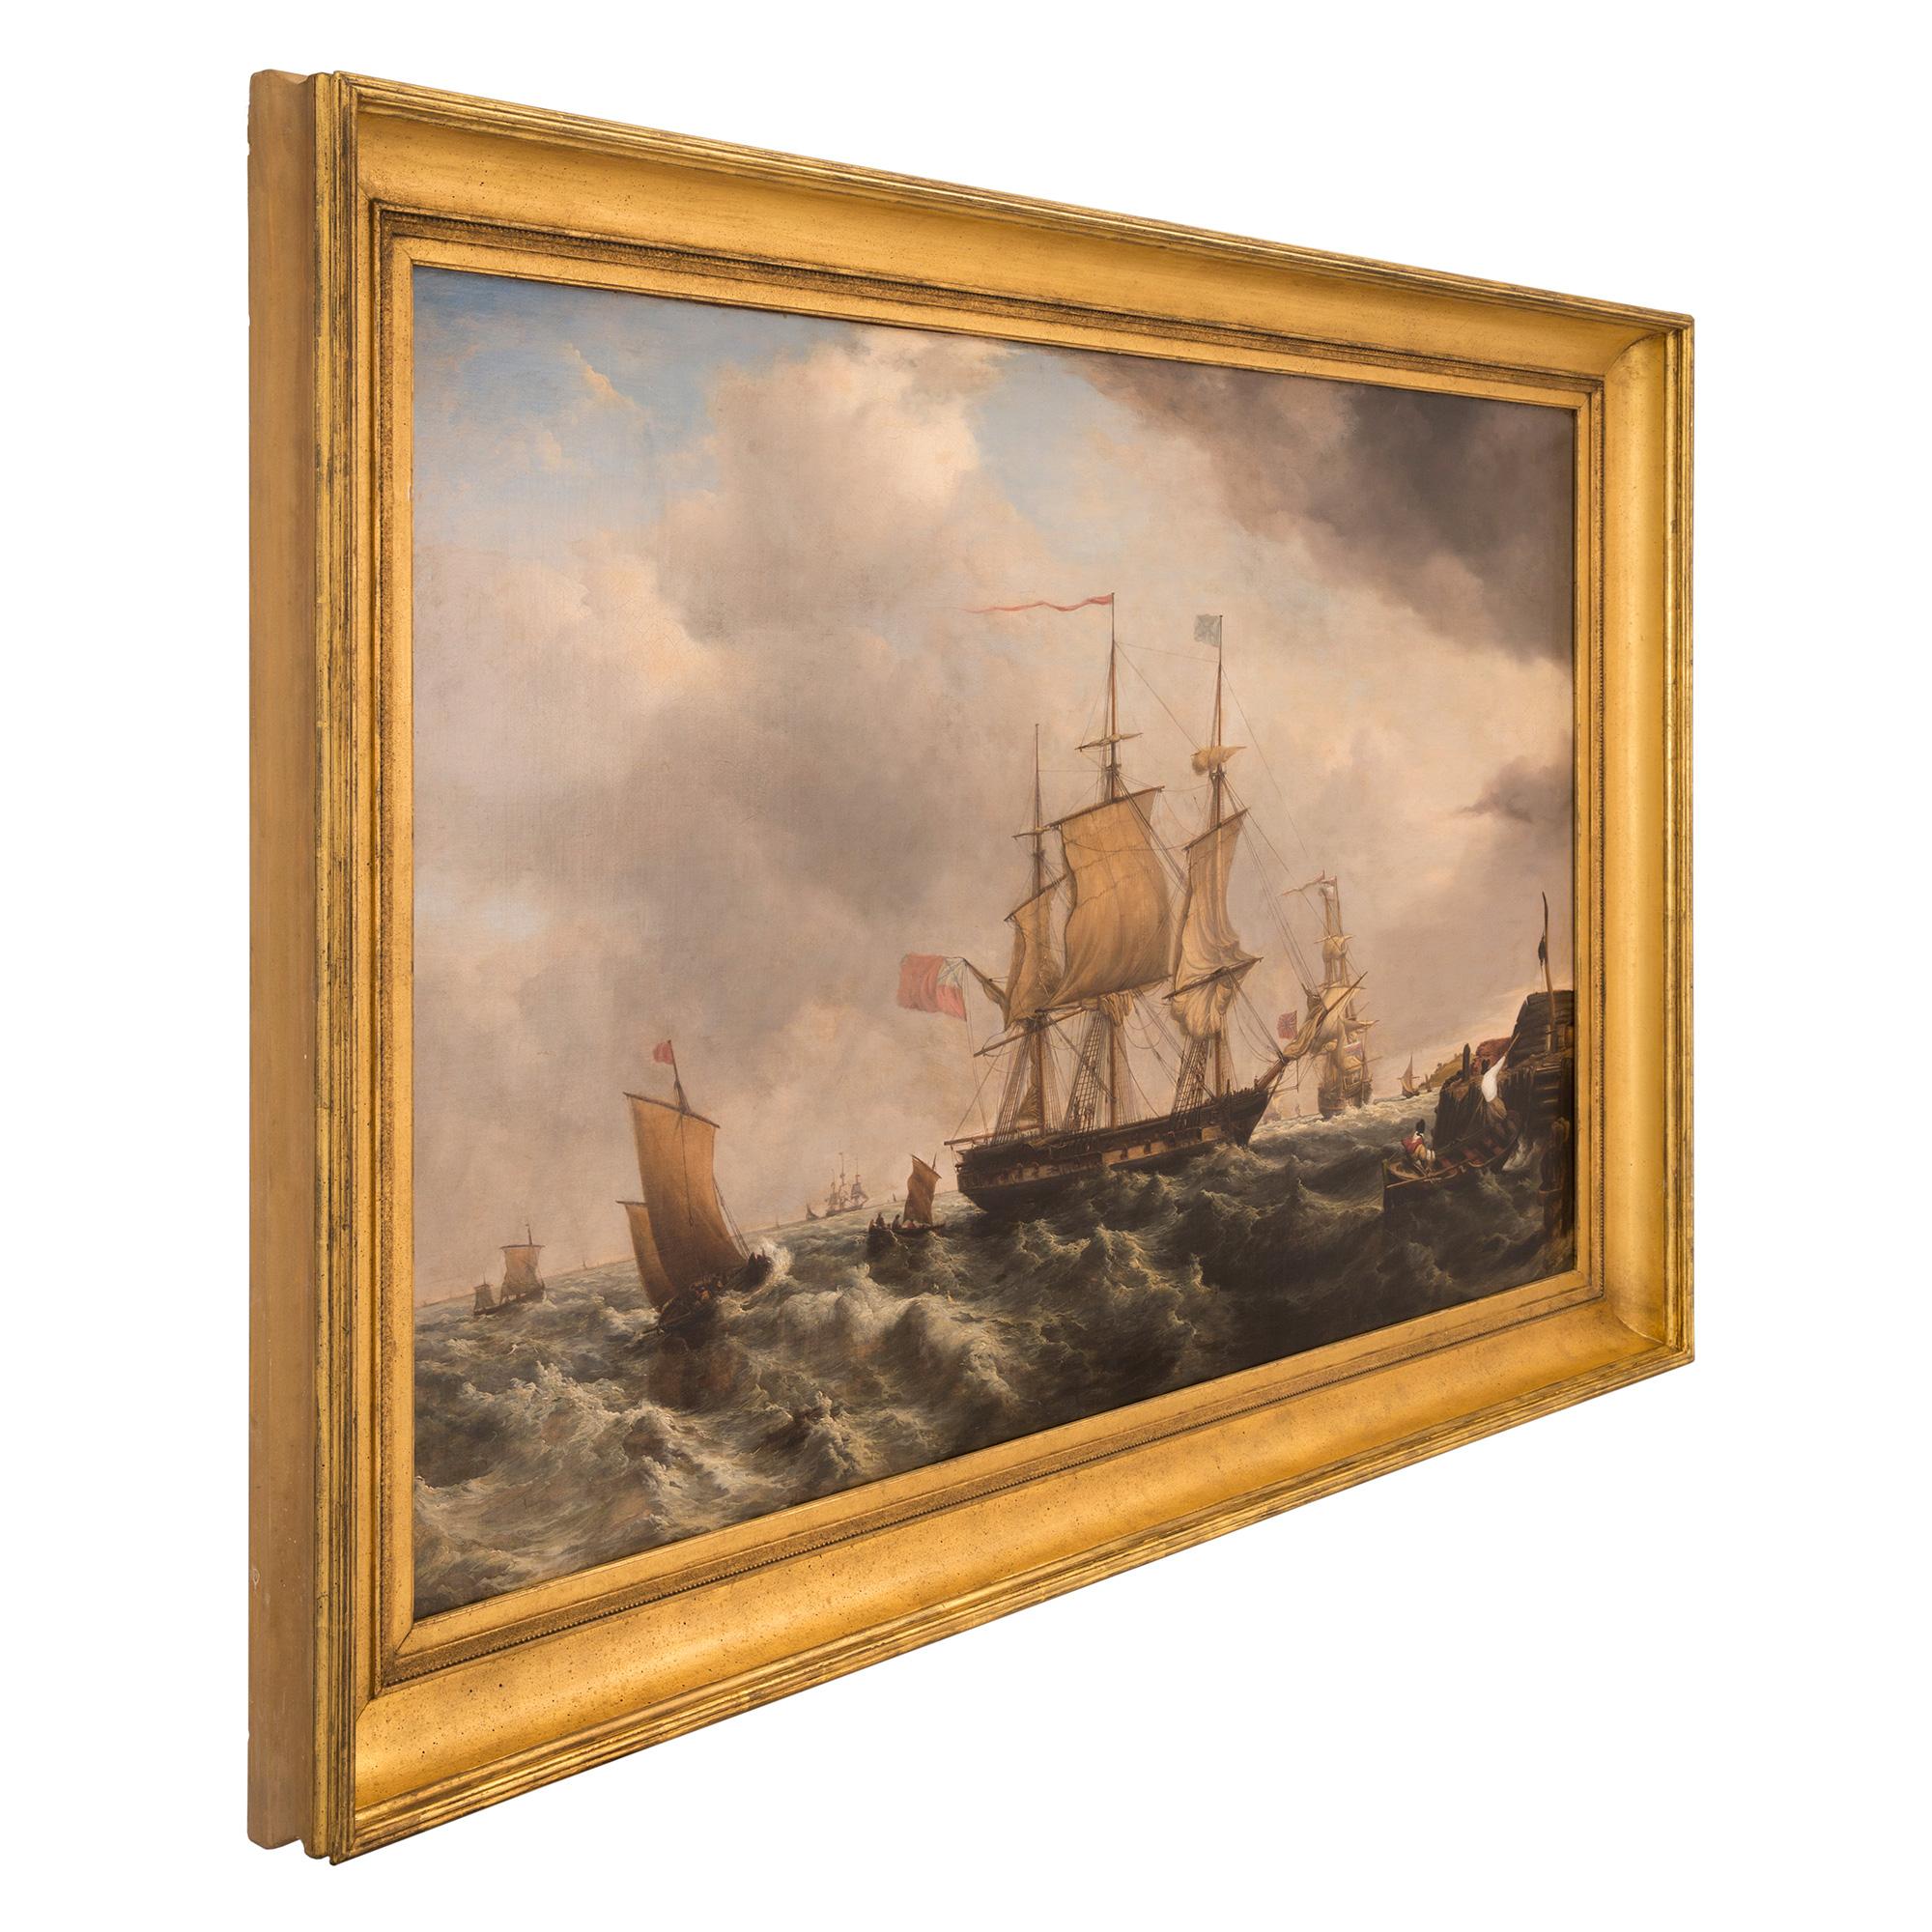 An outstanding English early 19th century oil on canvas painting of a maritime scene, by Thomas Luny. The beautiful painting is framed within an elegant mottled giltwood frame. At the center is a most impressive three mast ship in choppy seas.